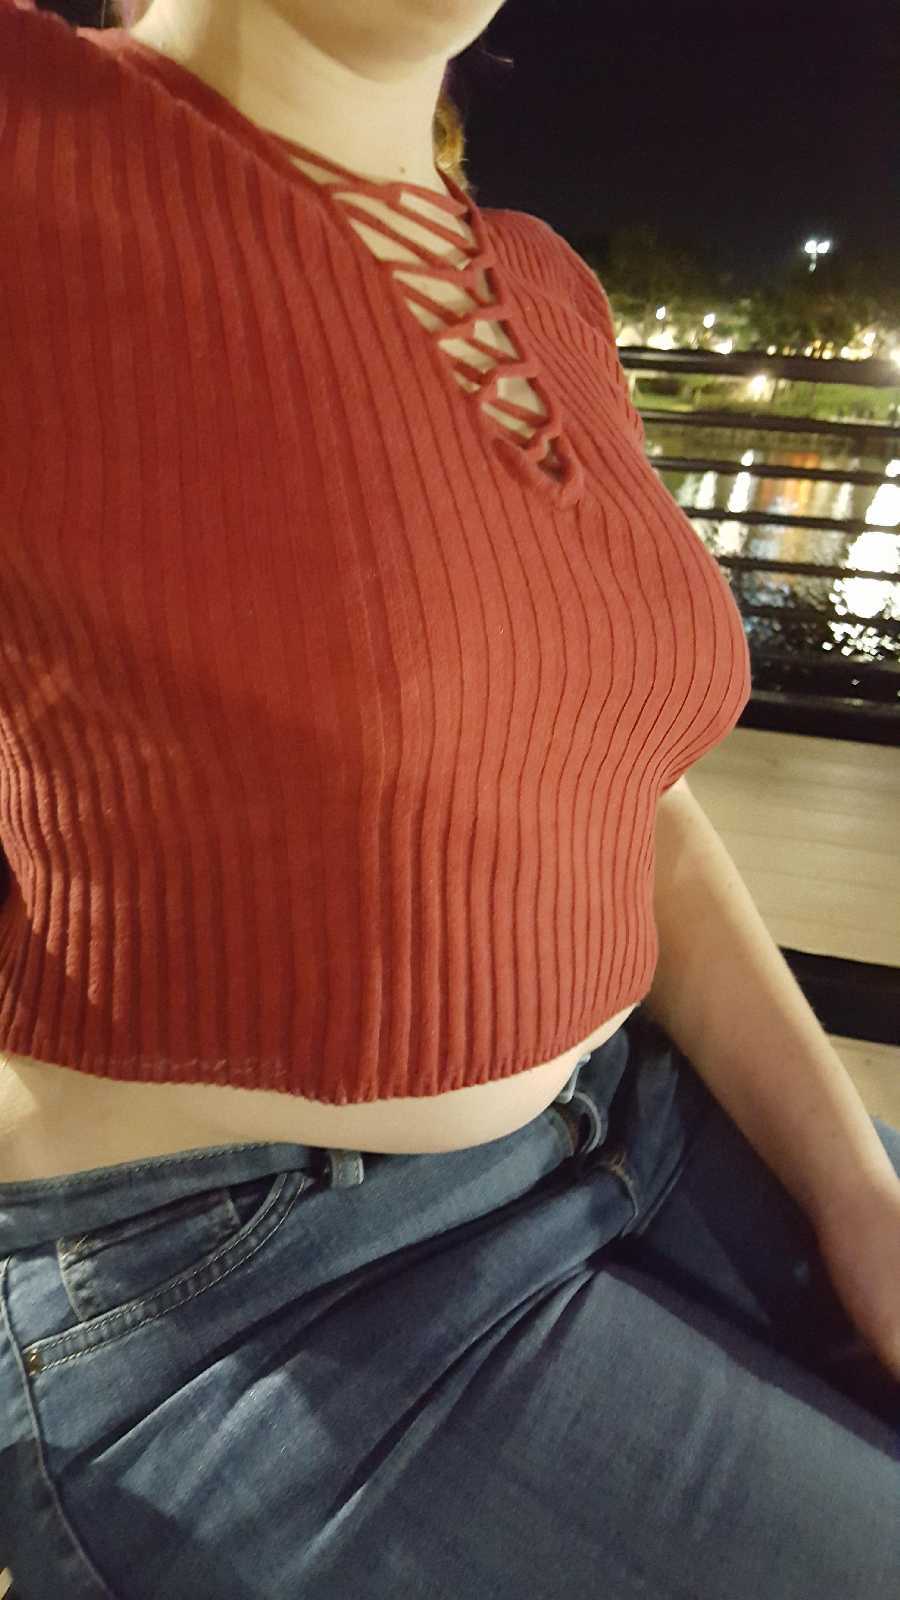 Hot, Red Shirt in Public Dare